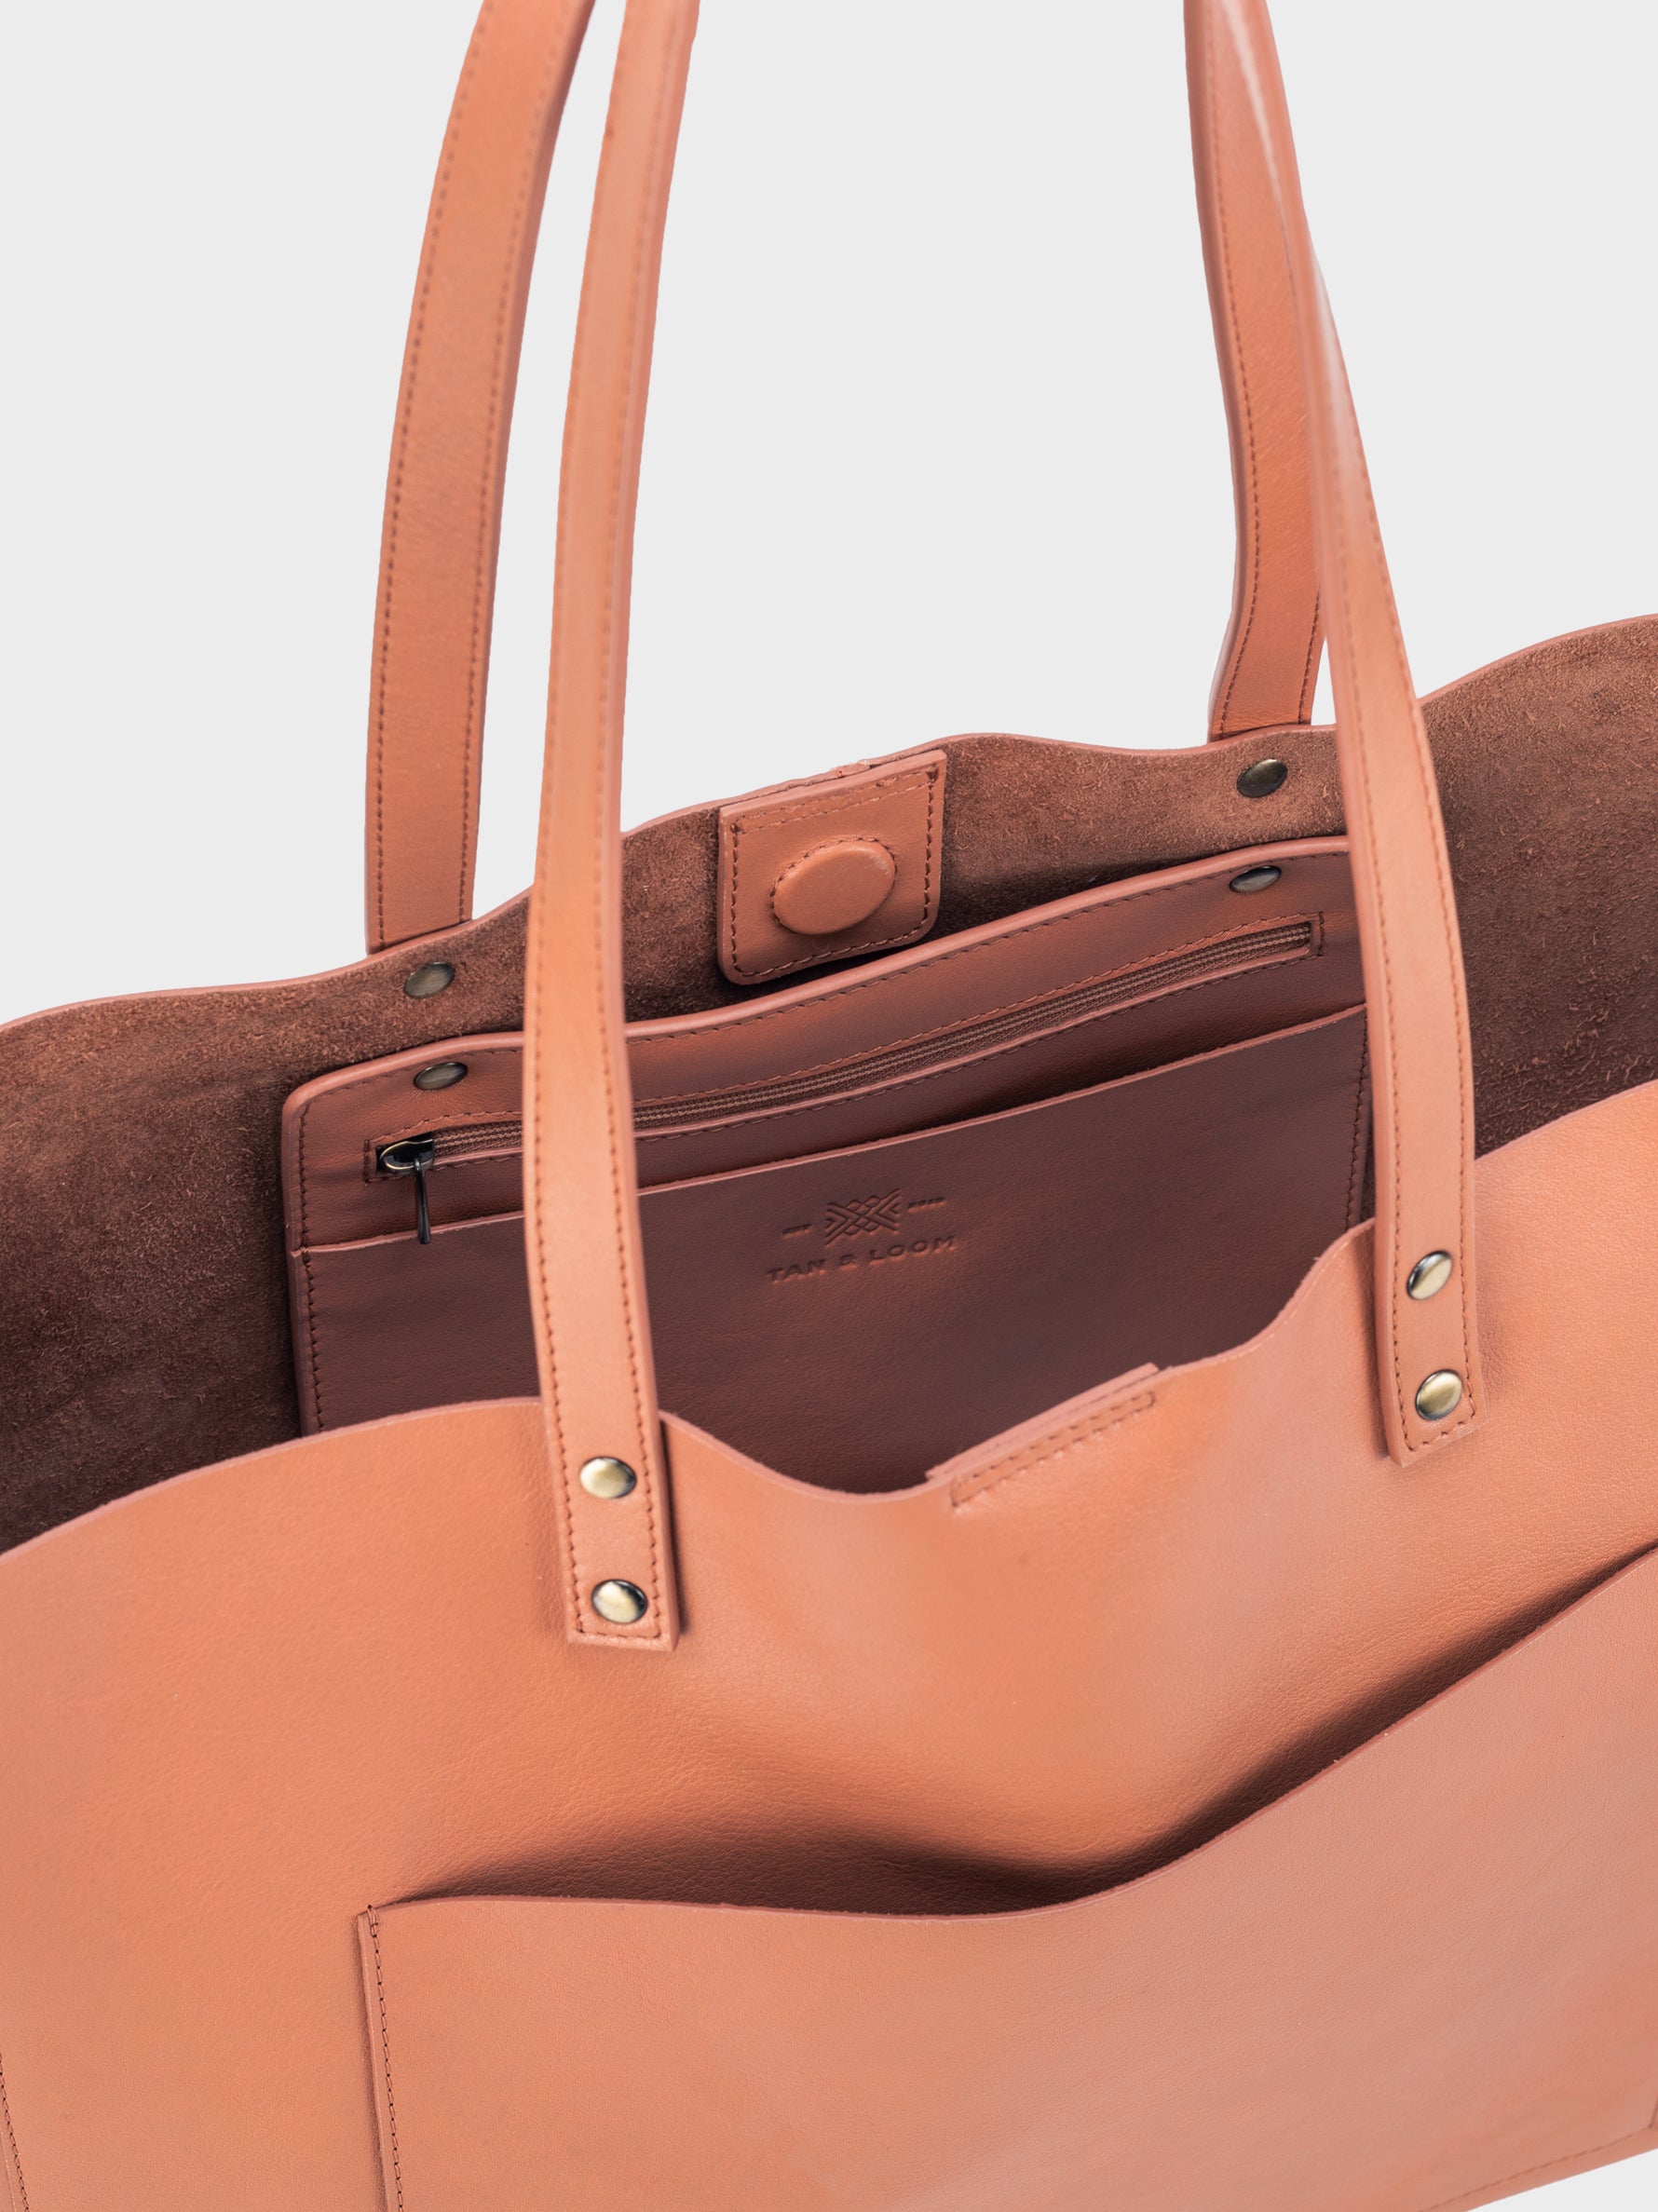 Handcrafted Genuine Vegetable Tanned Leather Old Fashioned Tote Large Dusty Peach for Women Tan & Loom